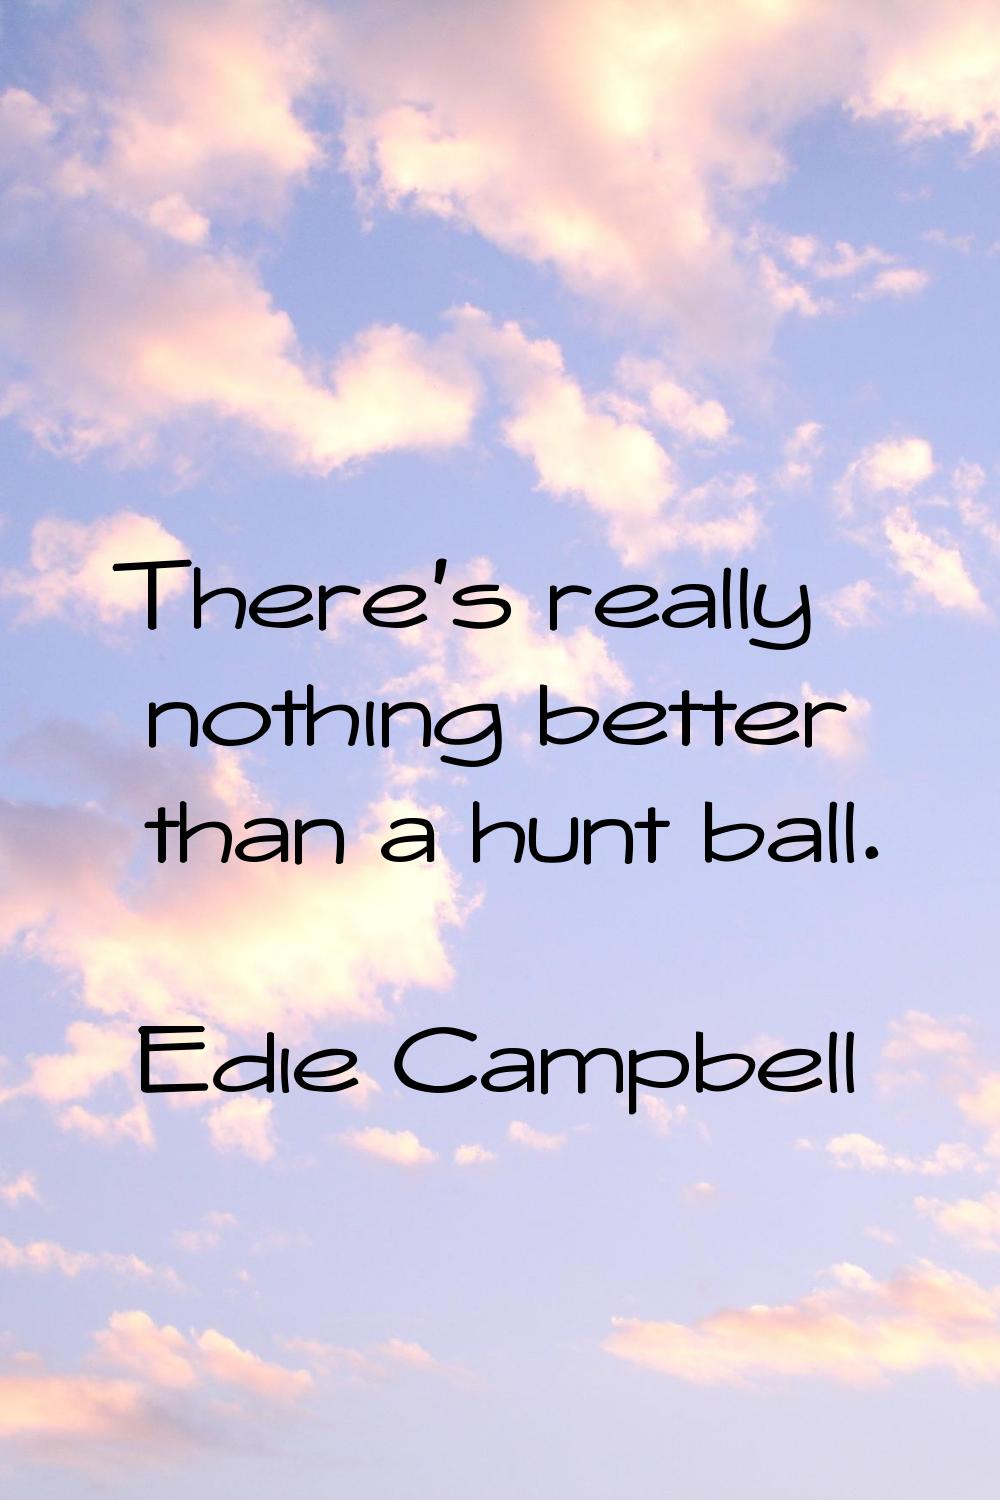 There's really nothing better than a hunt ball.